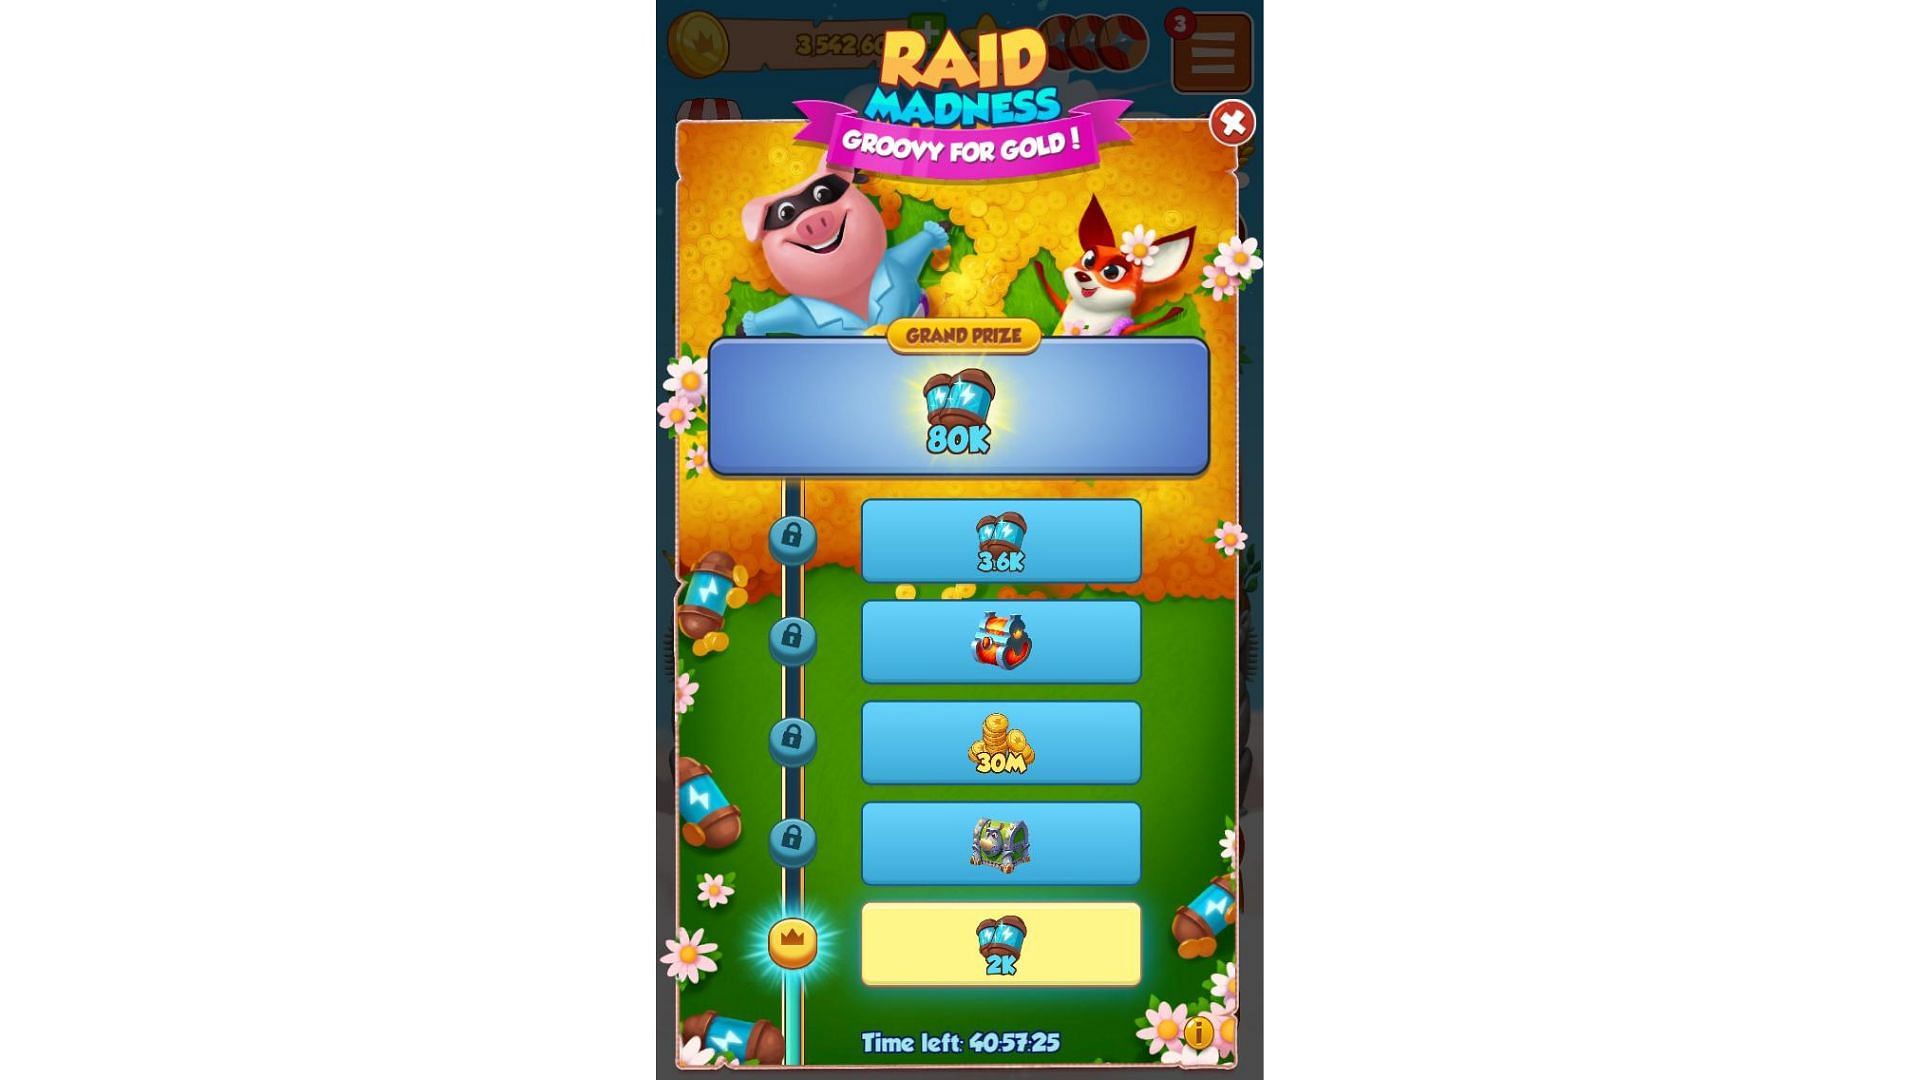 THE PIG ARMORY SEQUENCE FOR COIN MASTER (Raid madness - 5 points event) 